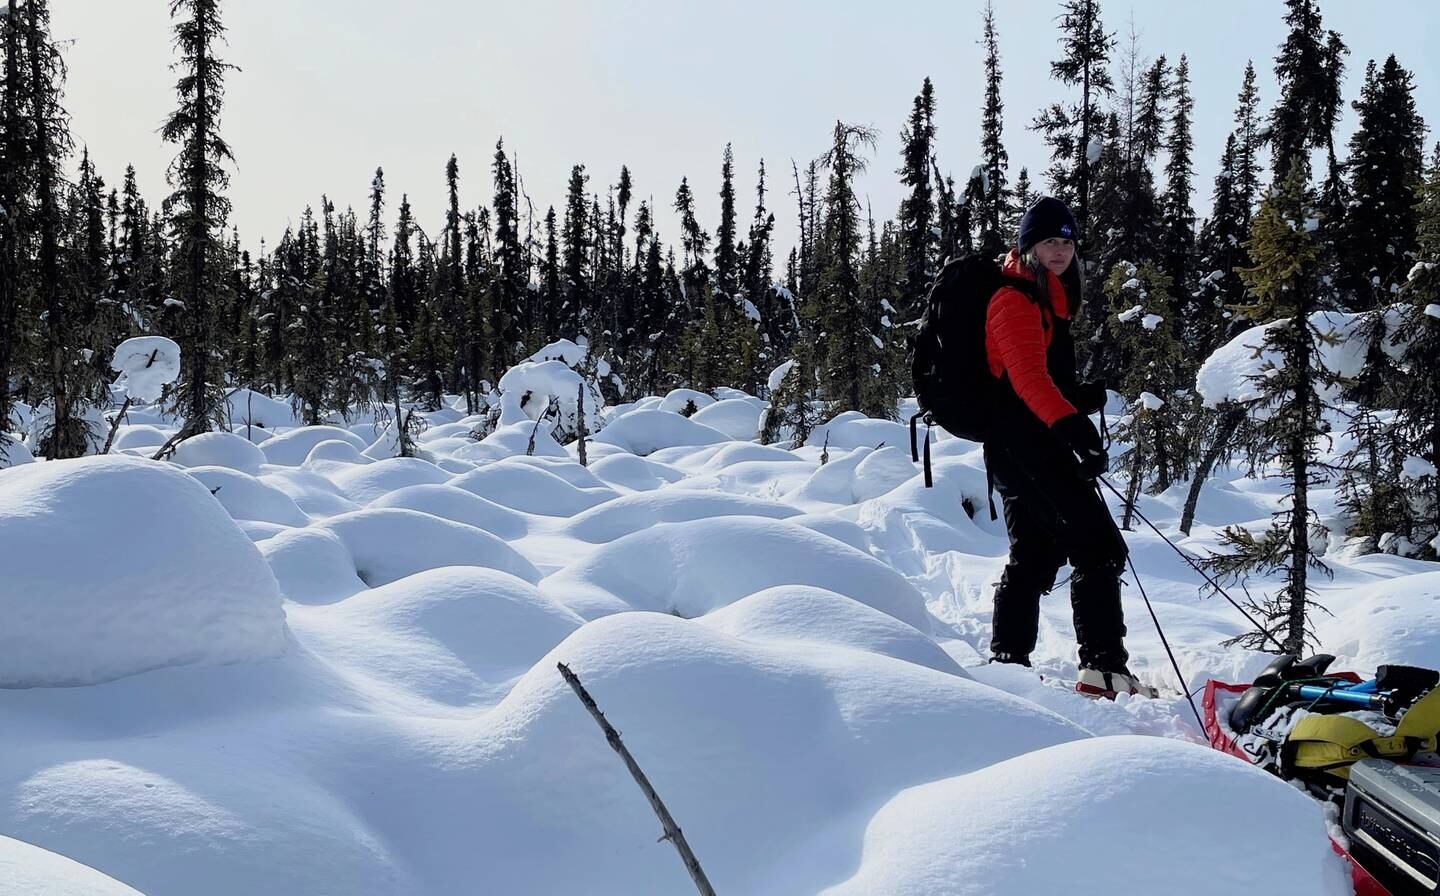 Carrie Vuyovich of NASA Goddard Space Flight Center in Maryland drags a sled through the boreal forest north of Fairbanks